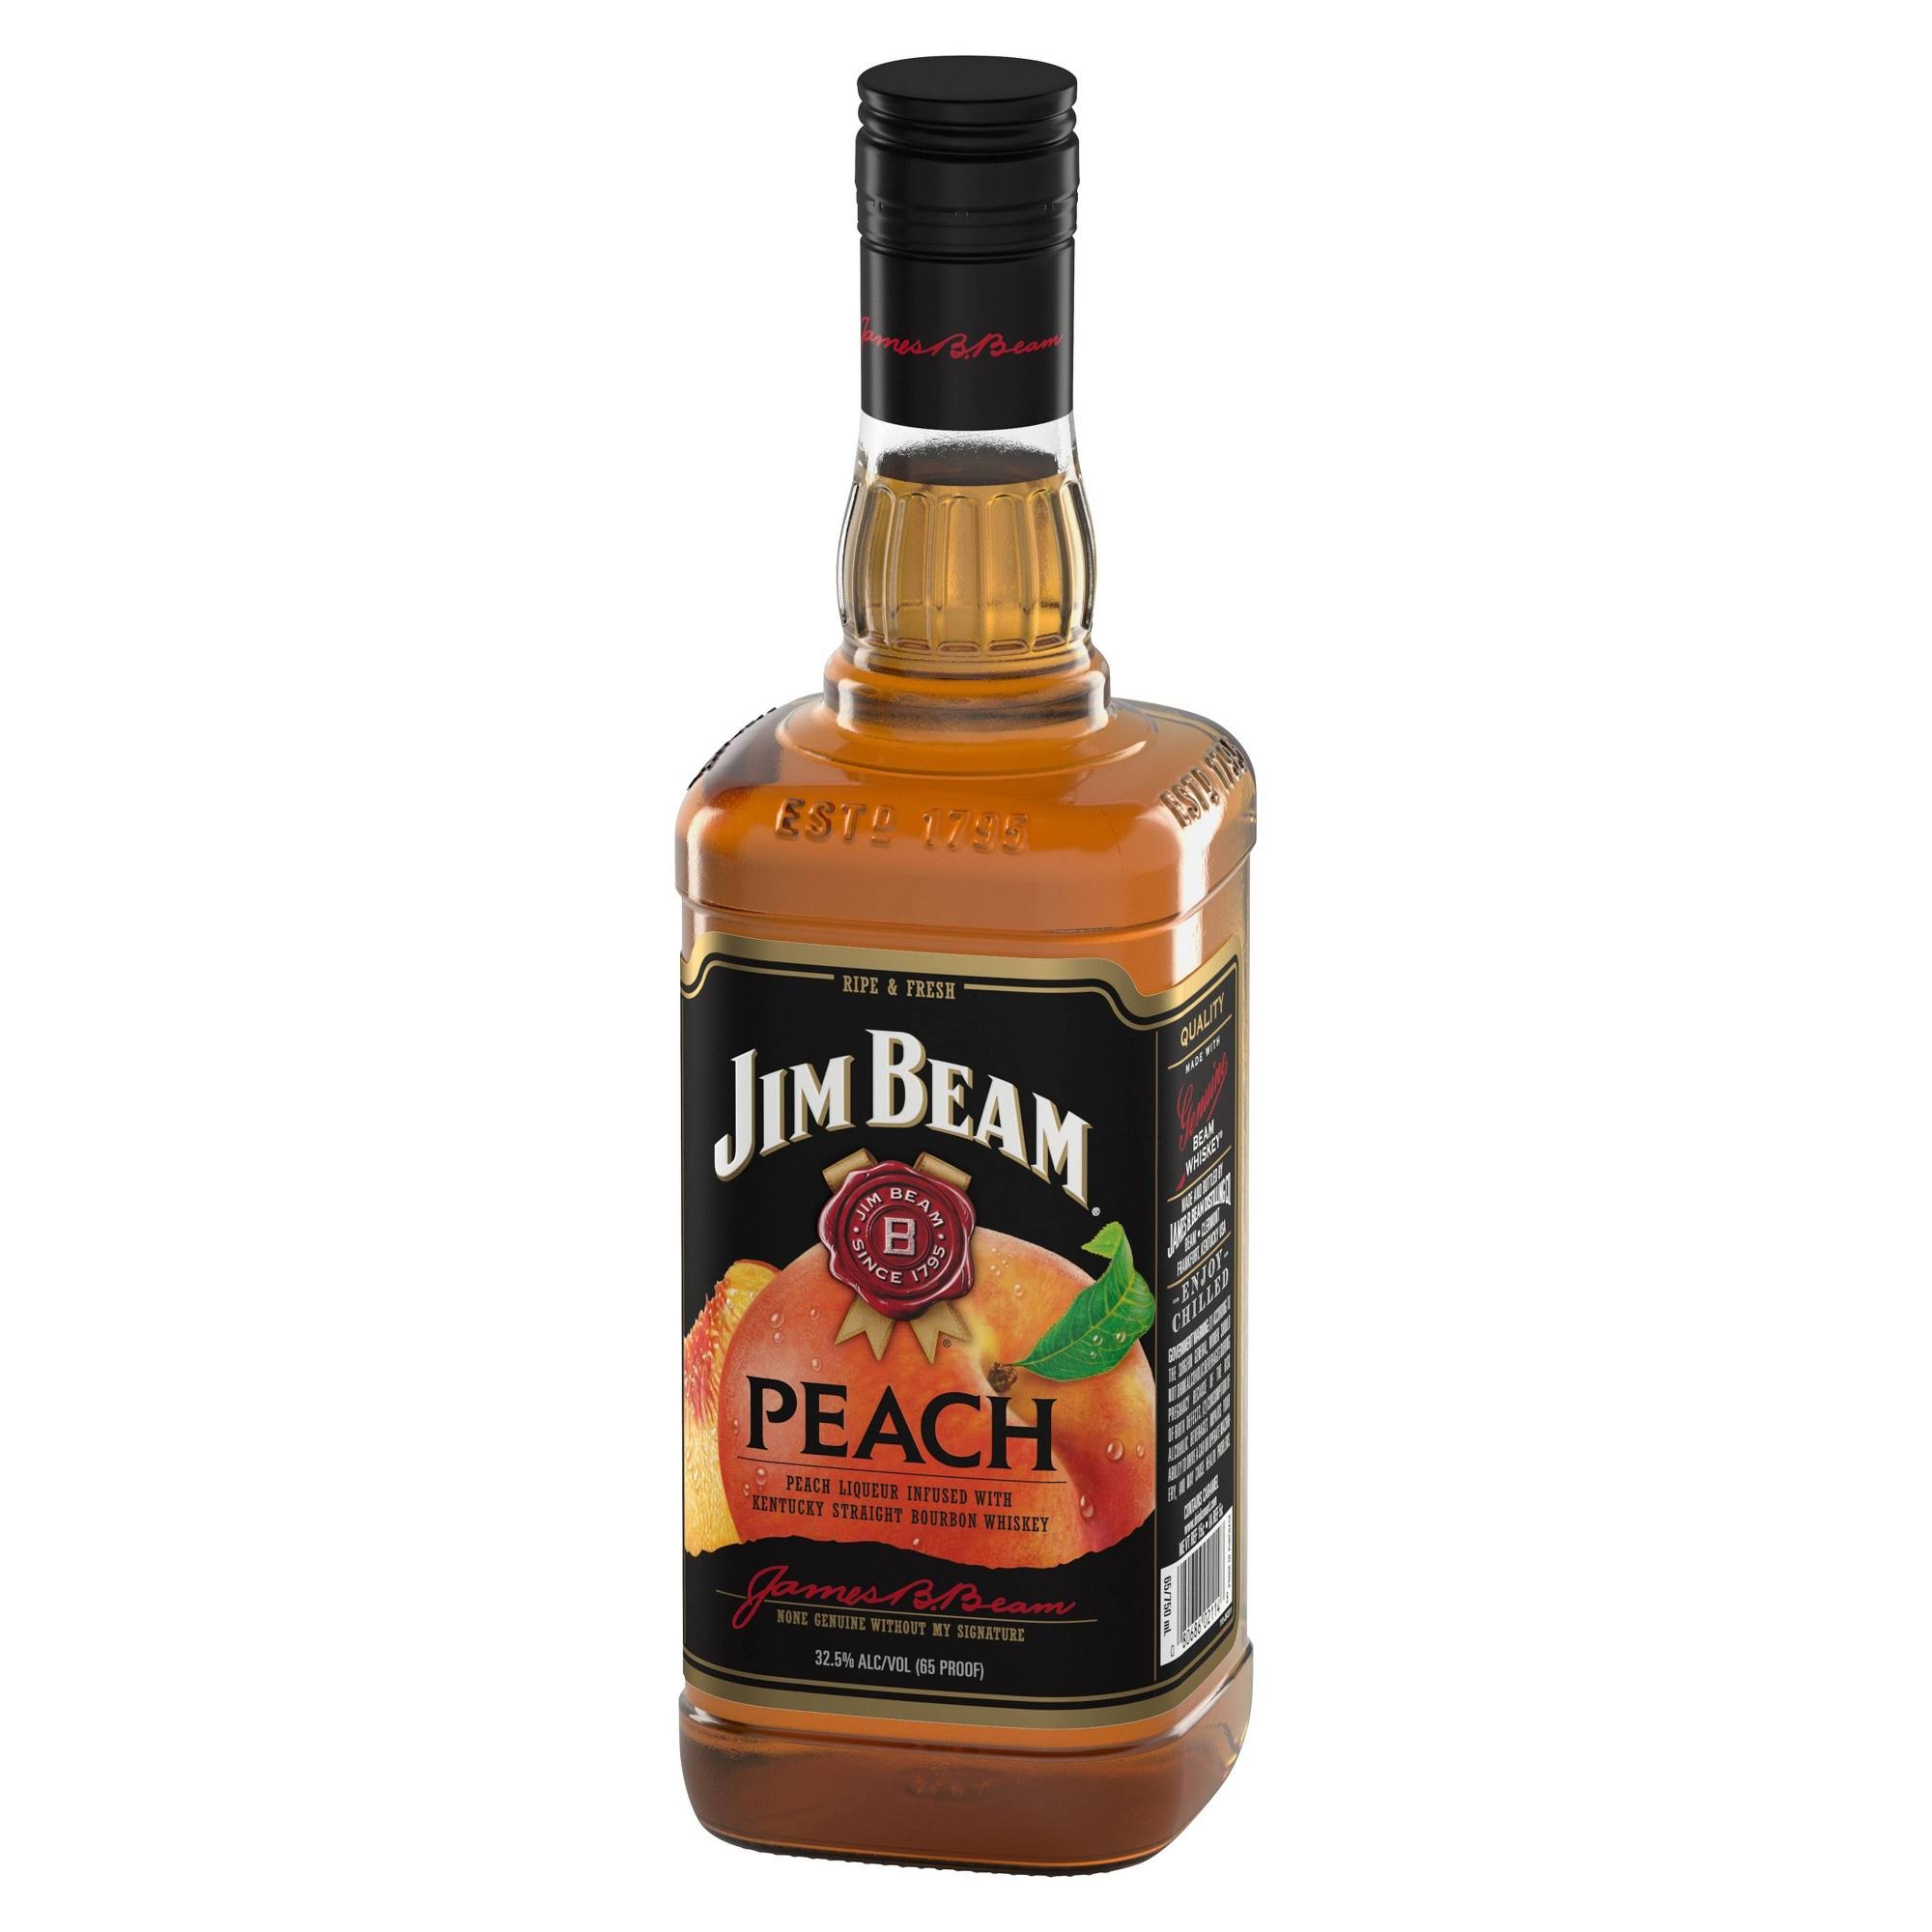 Jim Beam Bourbon Whiskey, Peach Liqueur Infused, with Kentucky Straight